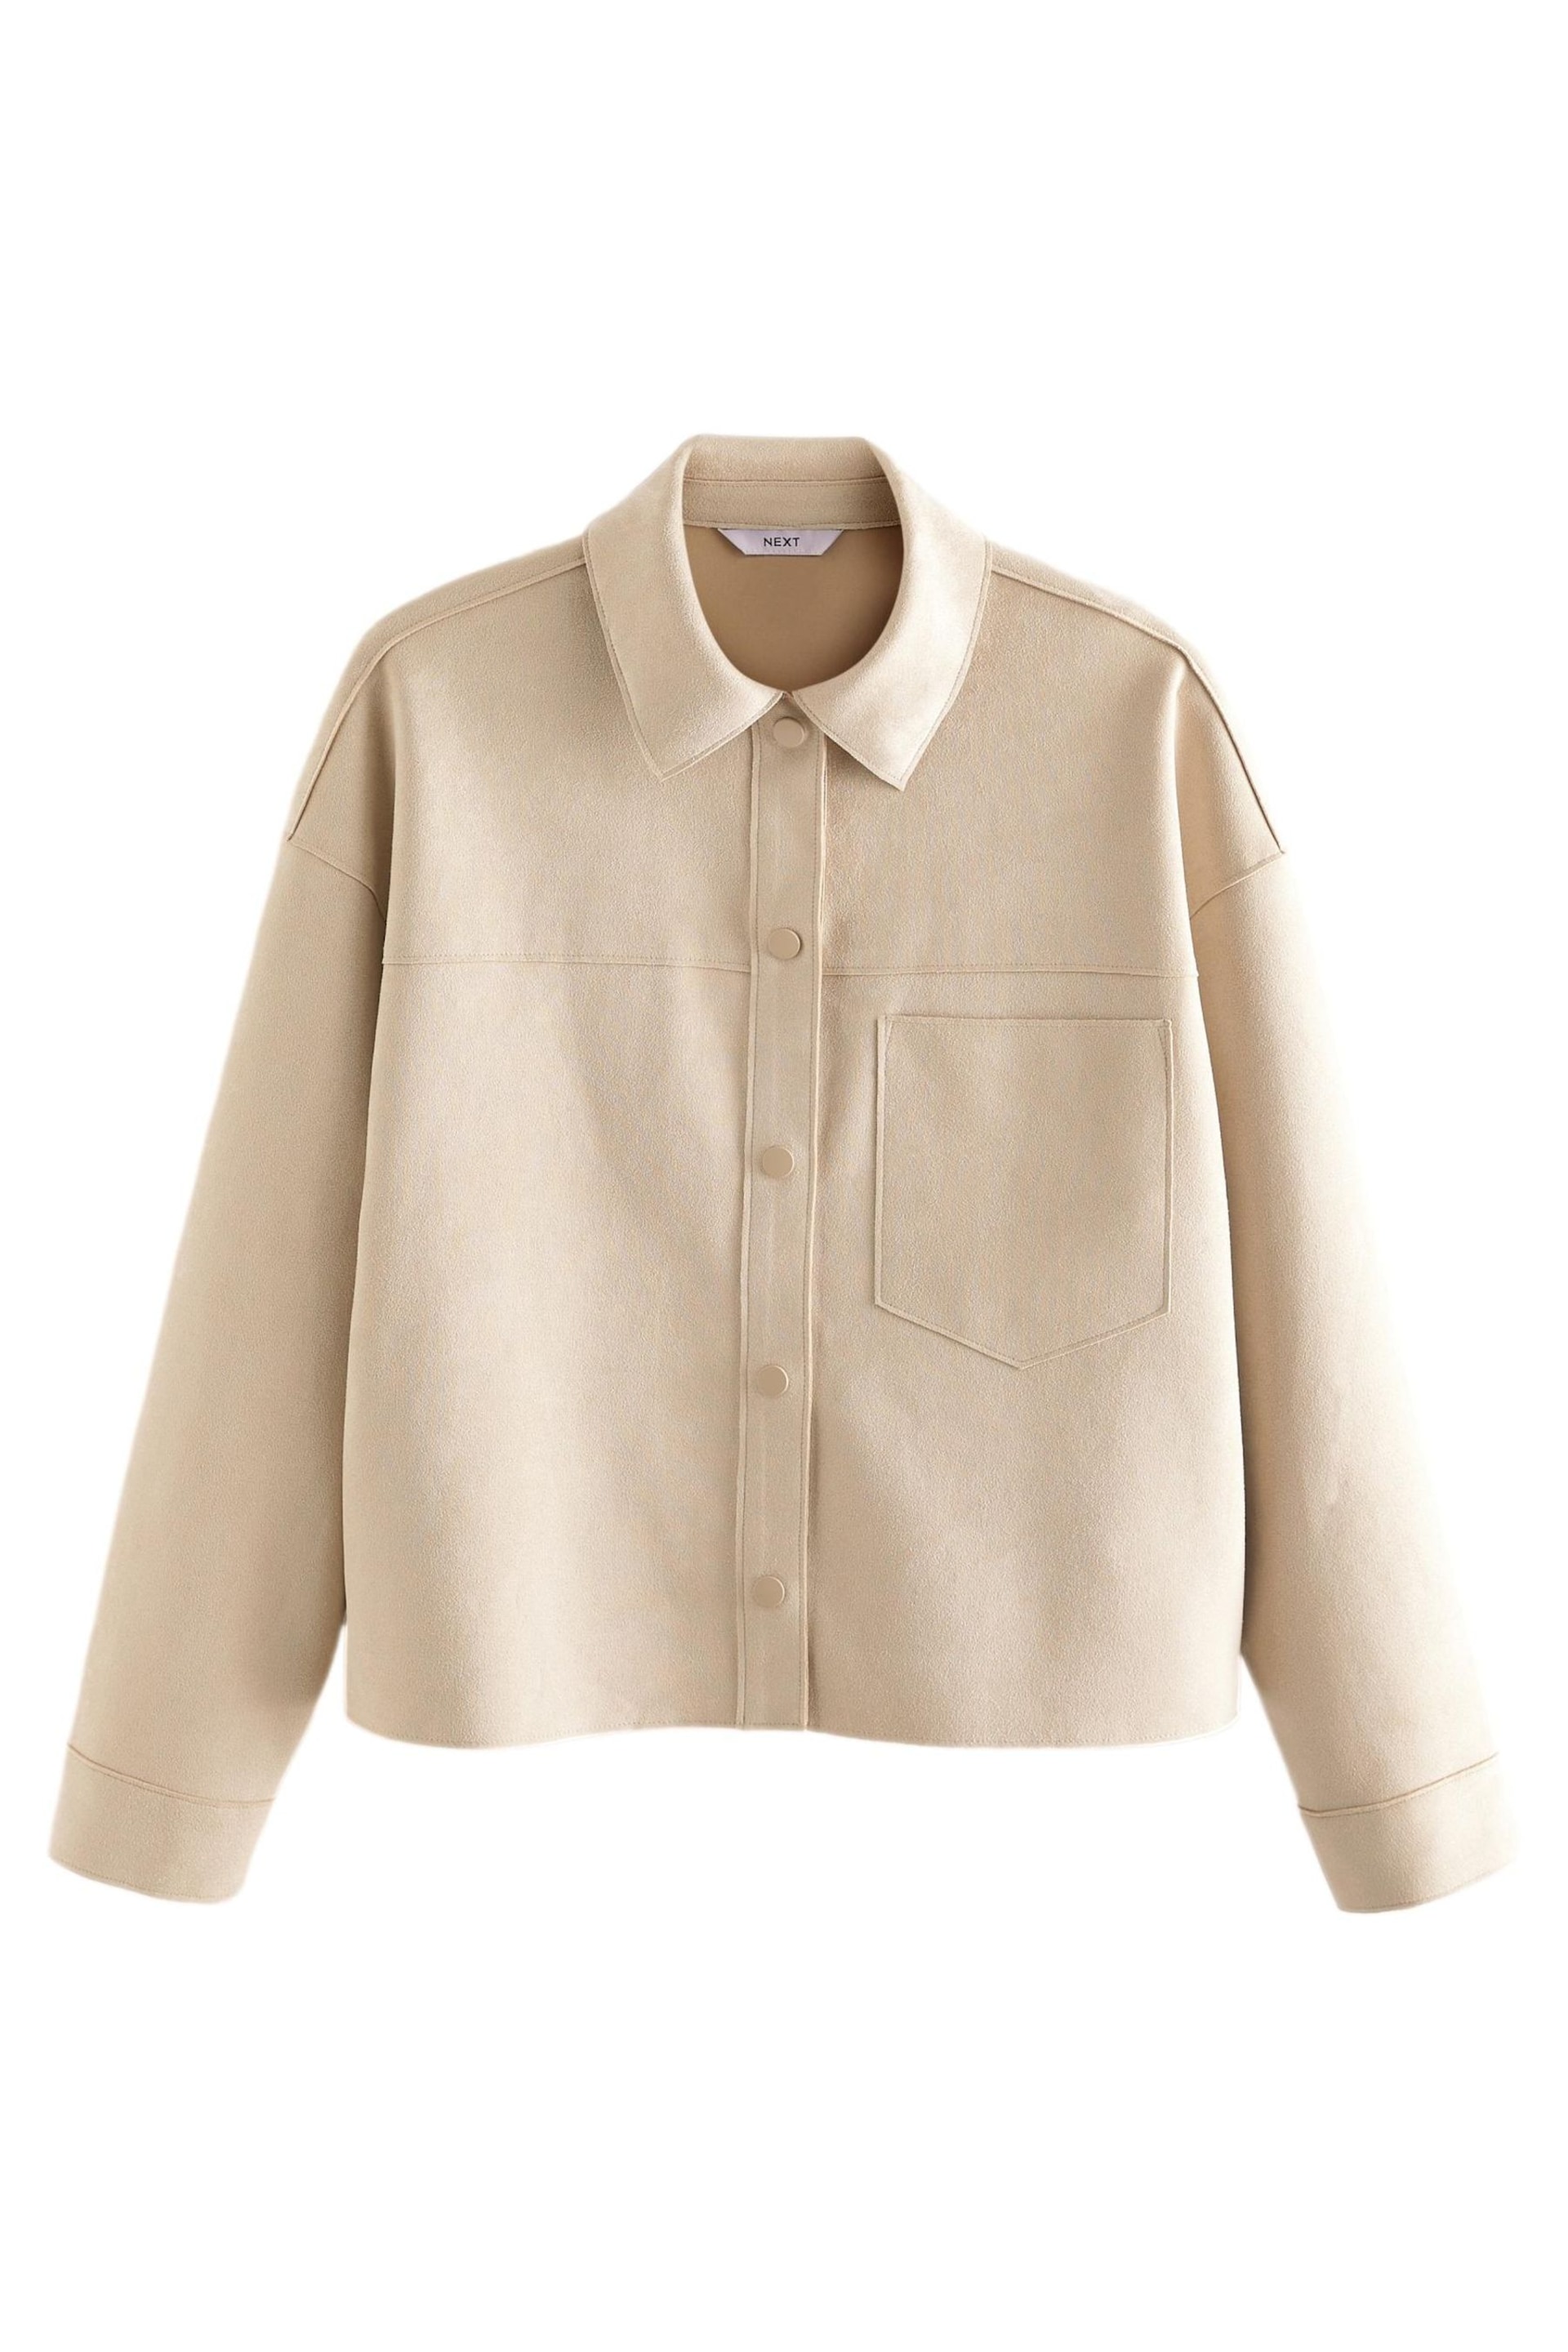 Cream Long Sleeve Suedette Shacket - Image 5 of 6